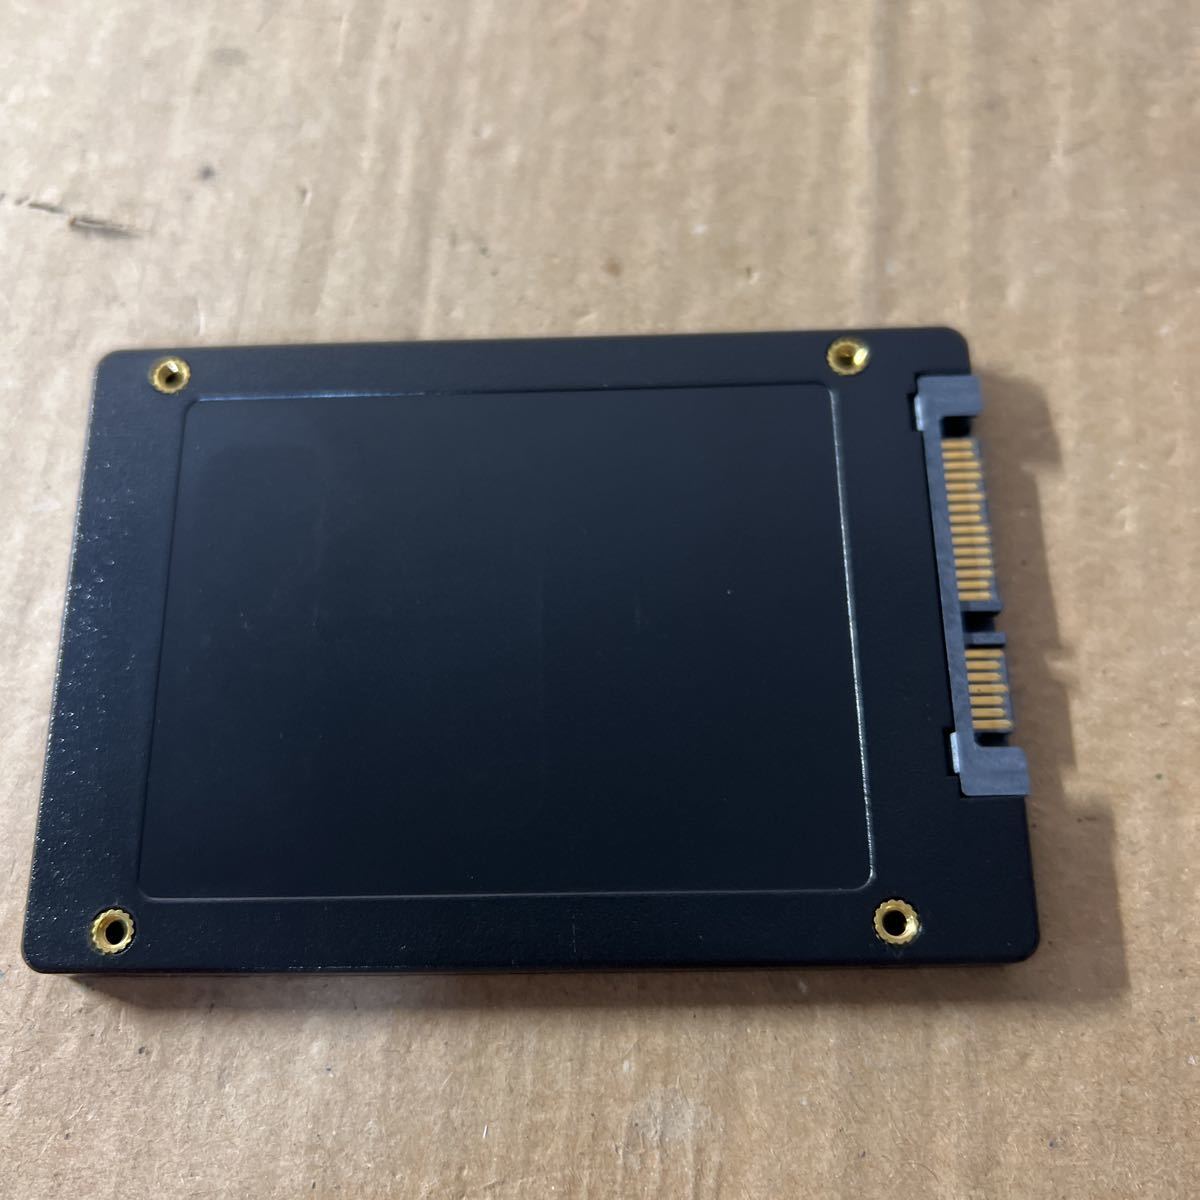 ROHS COMPLIANT SP SOLID STATE DRIVE A55 3D NAND 128GB SSD _画像2